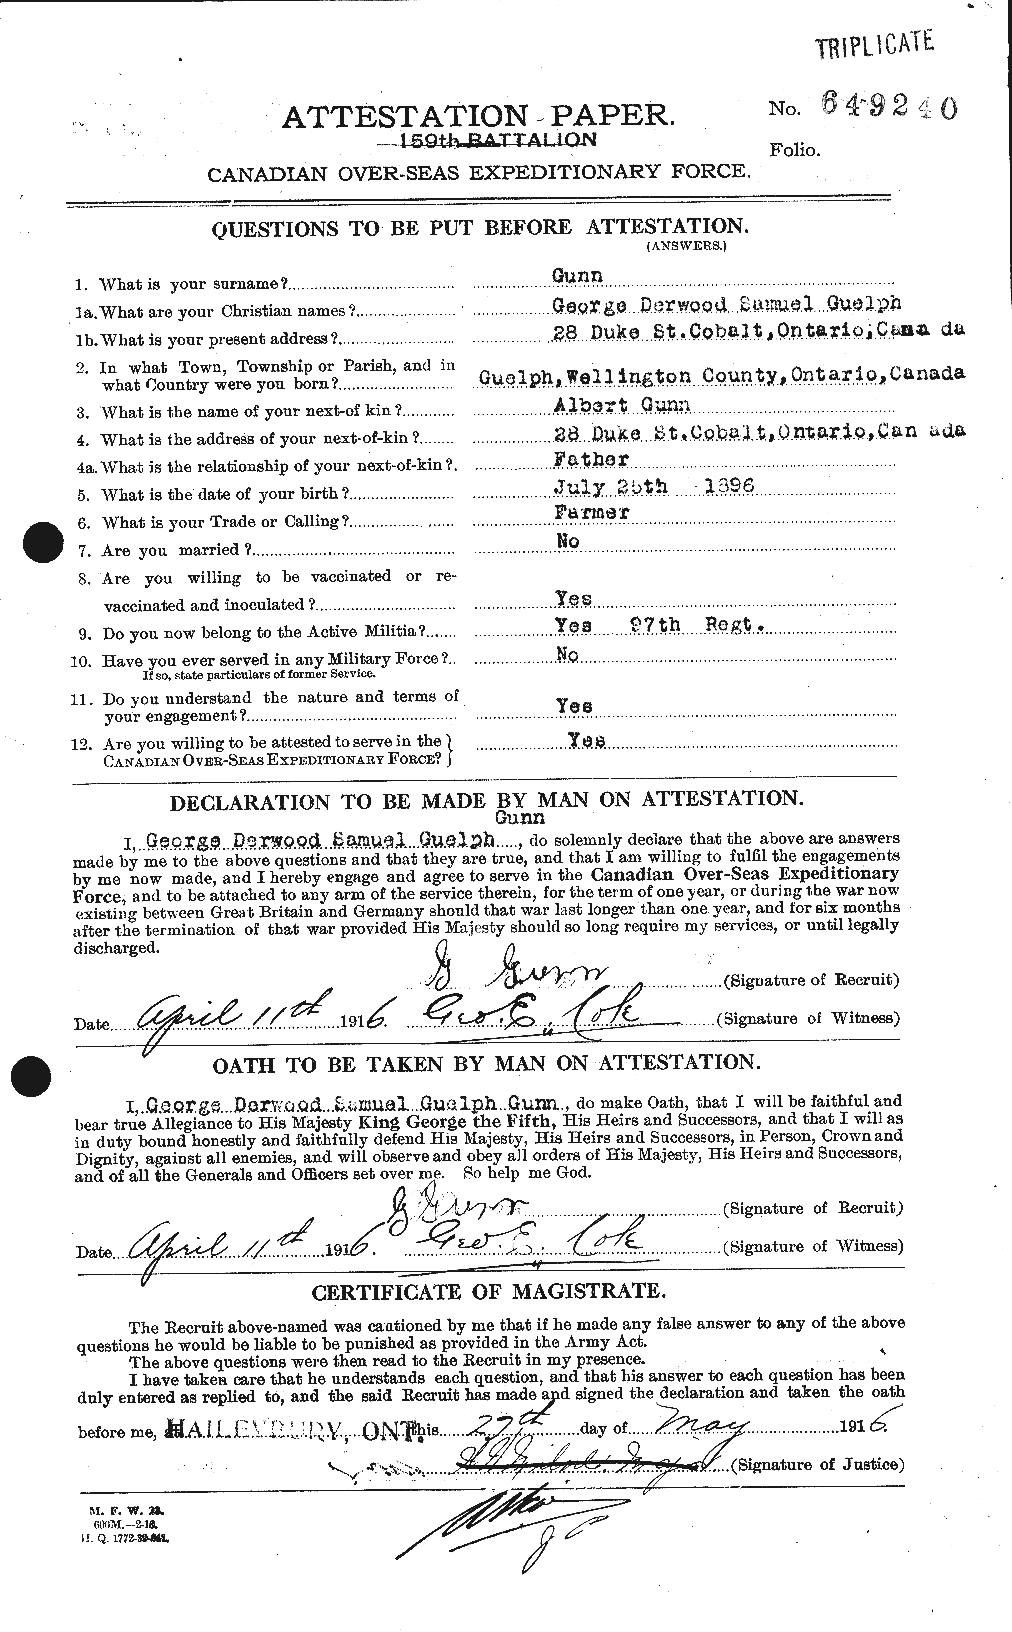 Personnel Records of the First World War - CEF 369240a